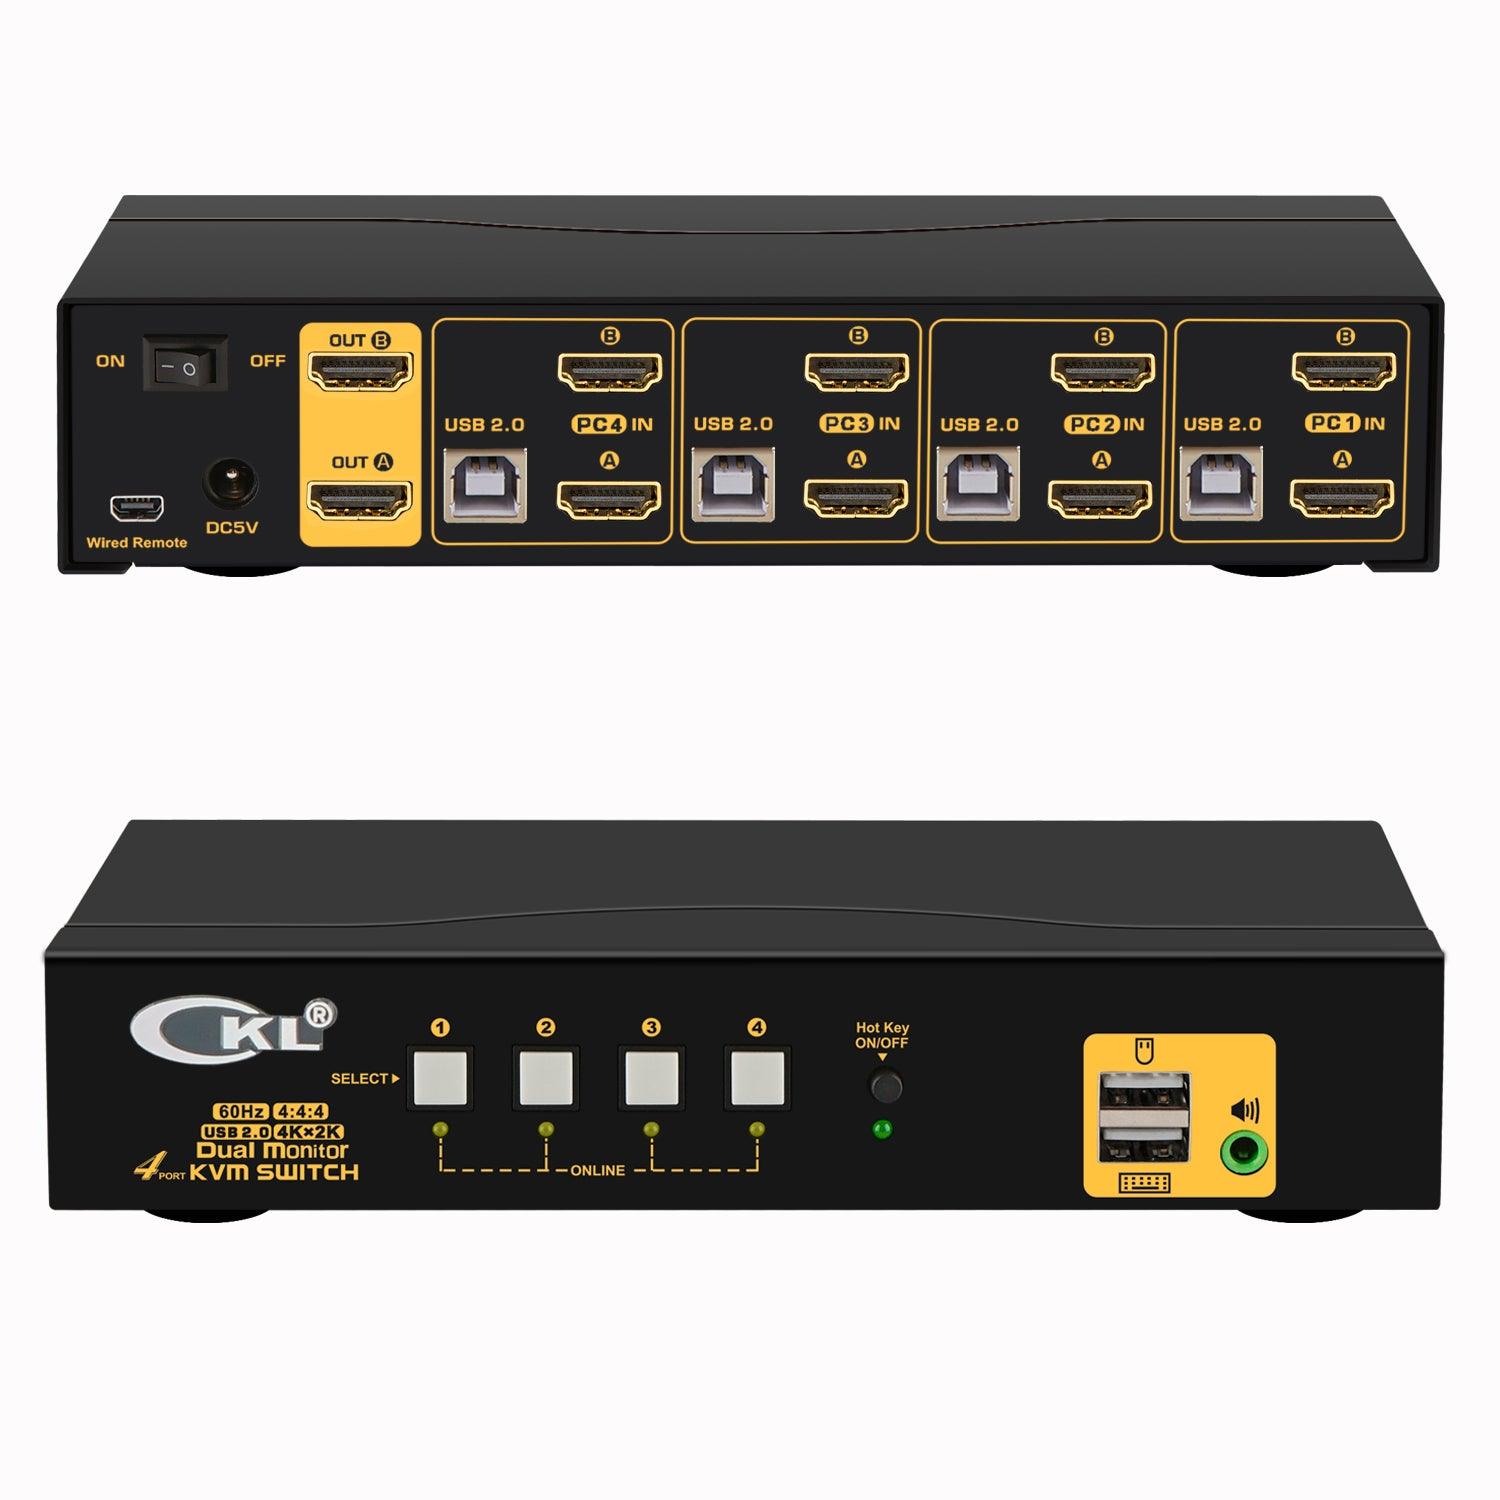 4 Port KVM Switch Dual Monitor HDMI 4K 60Hz for 4 Computers 2 Extended Display with Cables, No Extra USB 2.0 HUB, Supports YUV 4:4:4, HDCP 1.4, HDR 10, EDID, Audio, Hotkey 942HUA-1A - CKL KVM Switches